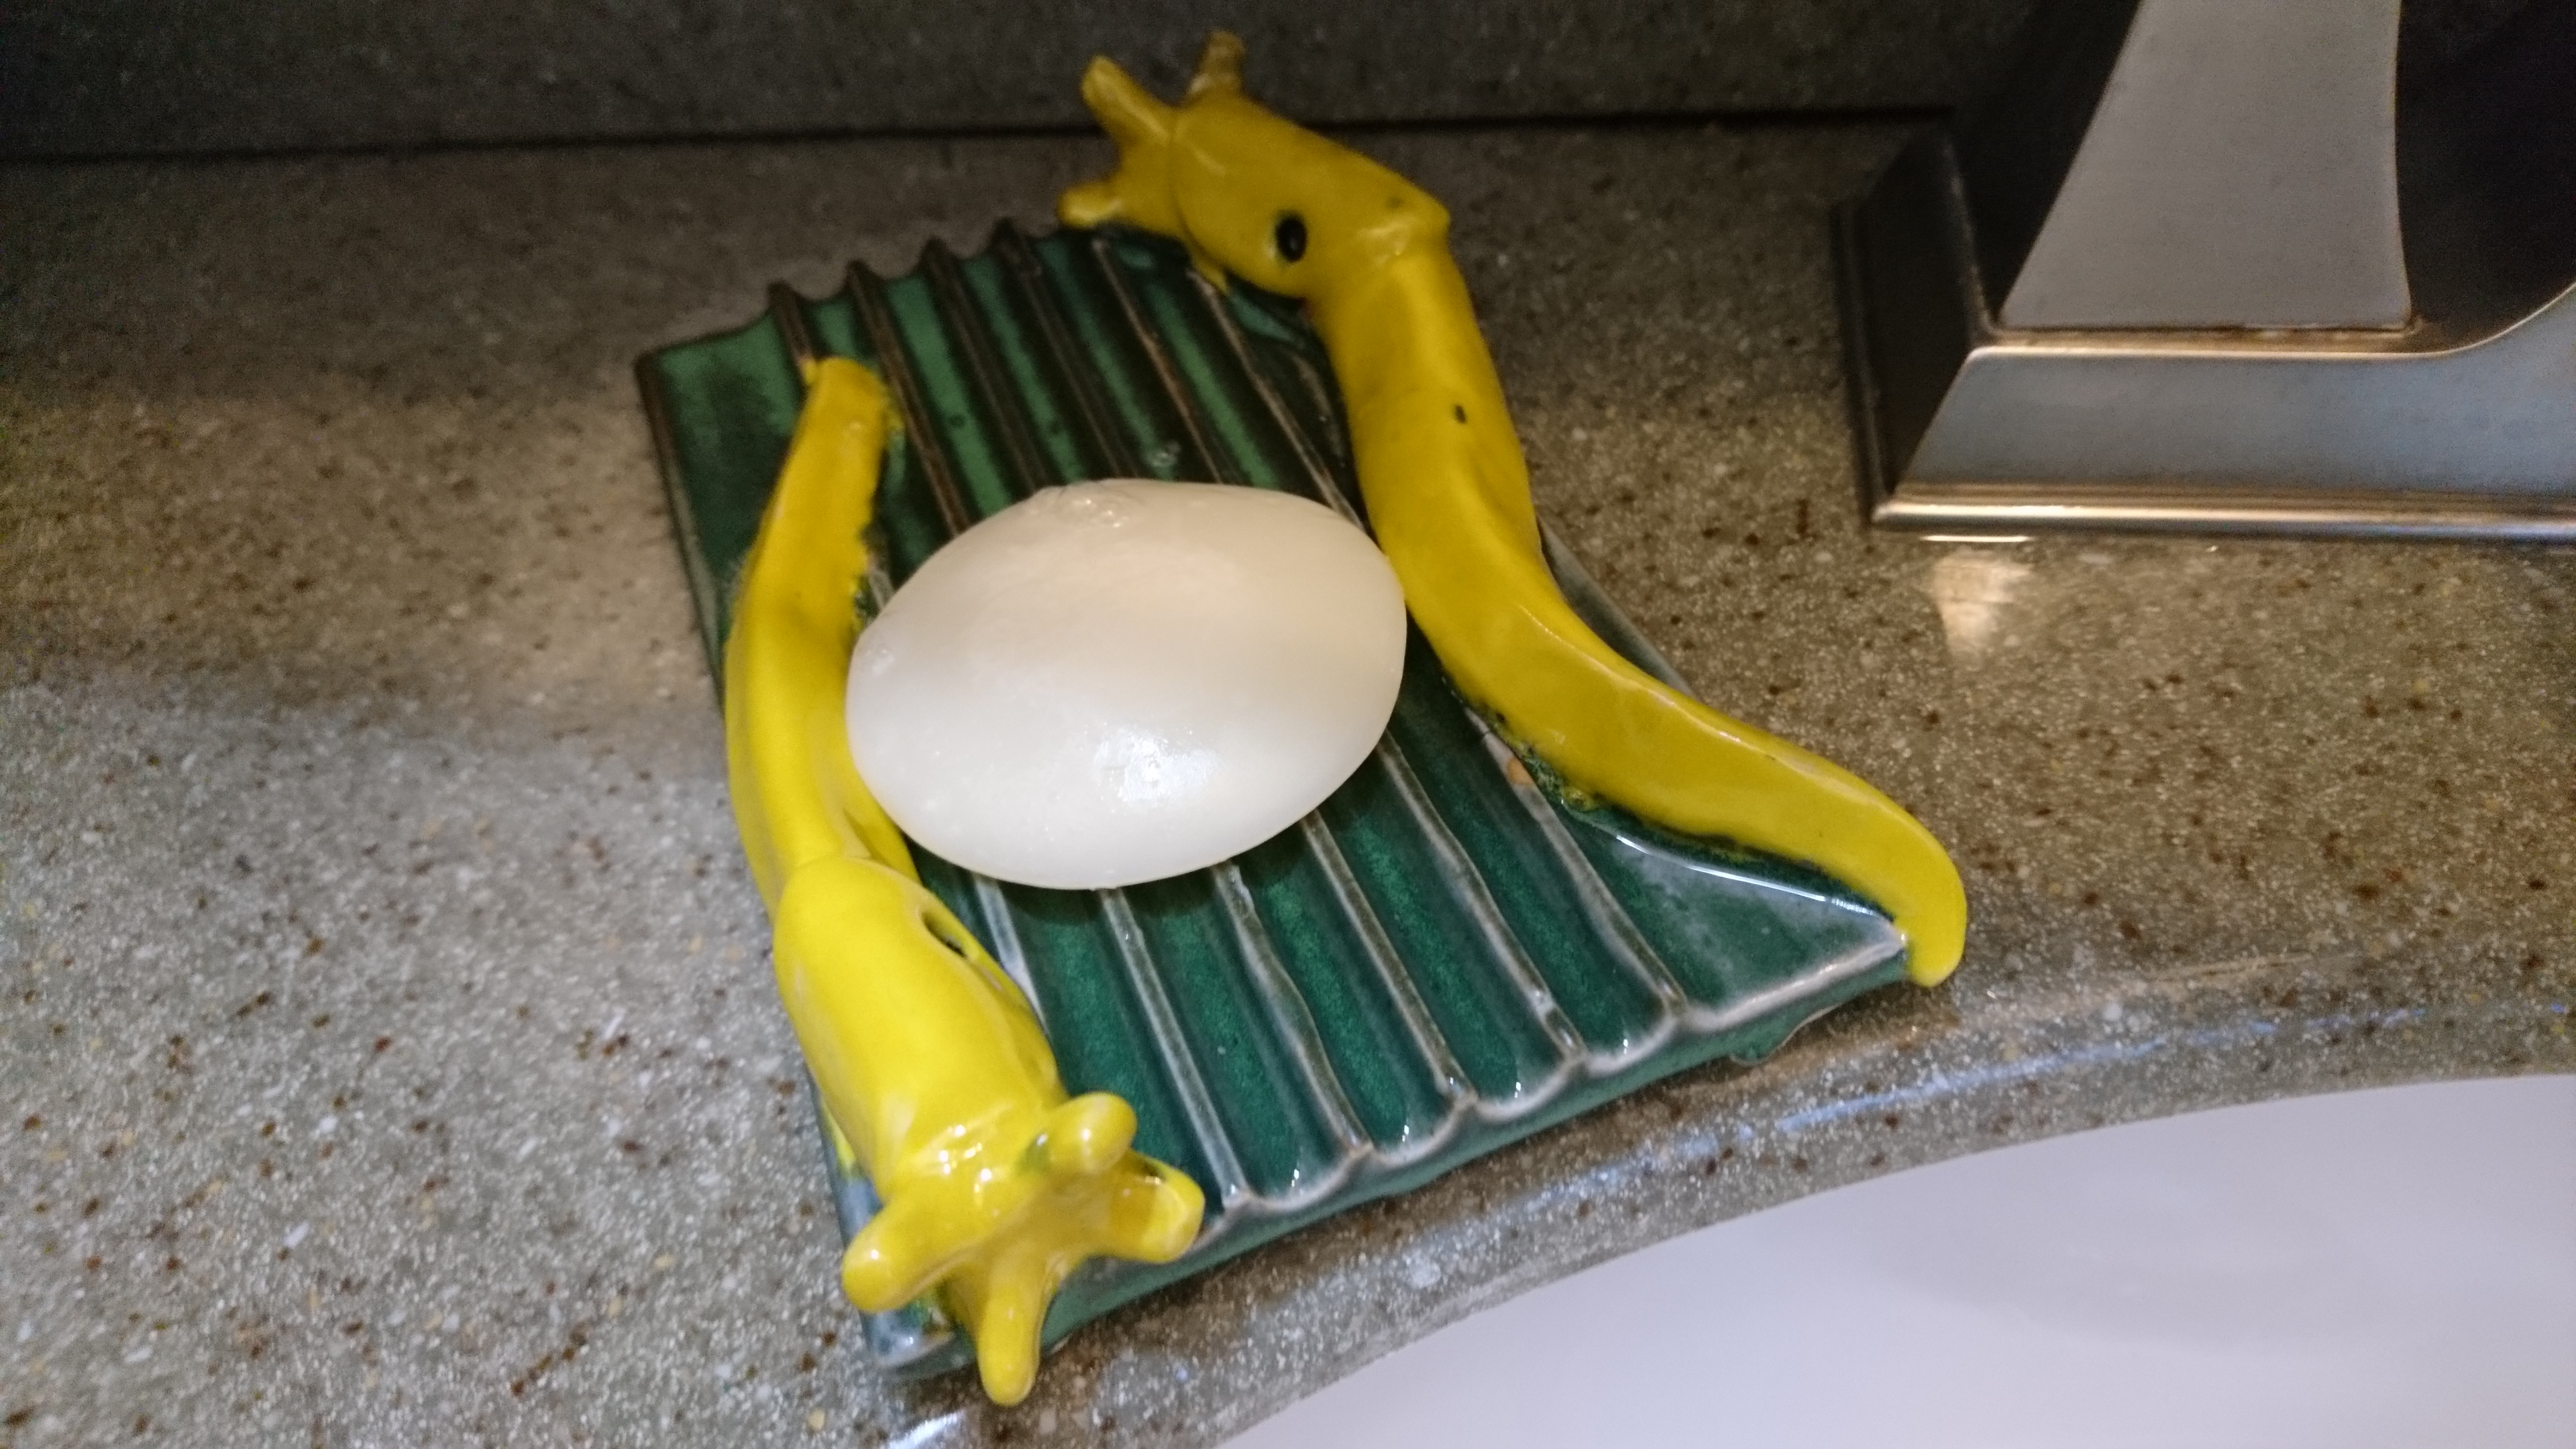 photo of a sluggy soap dish with soap on it